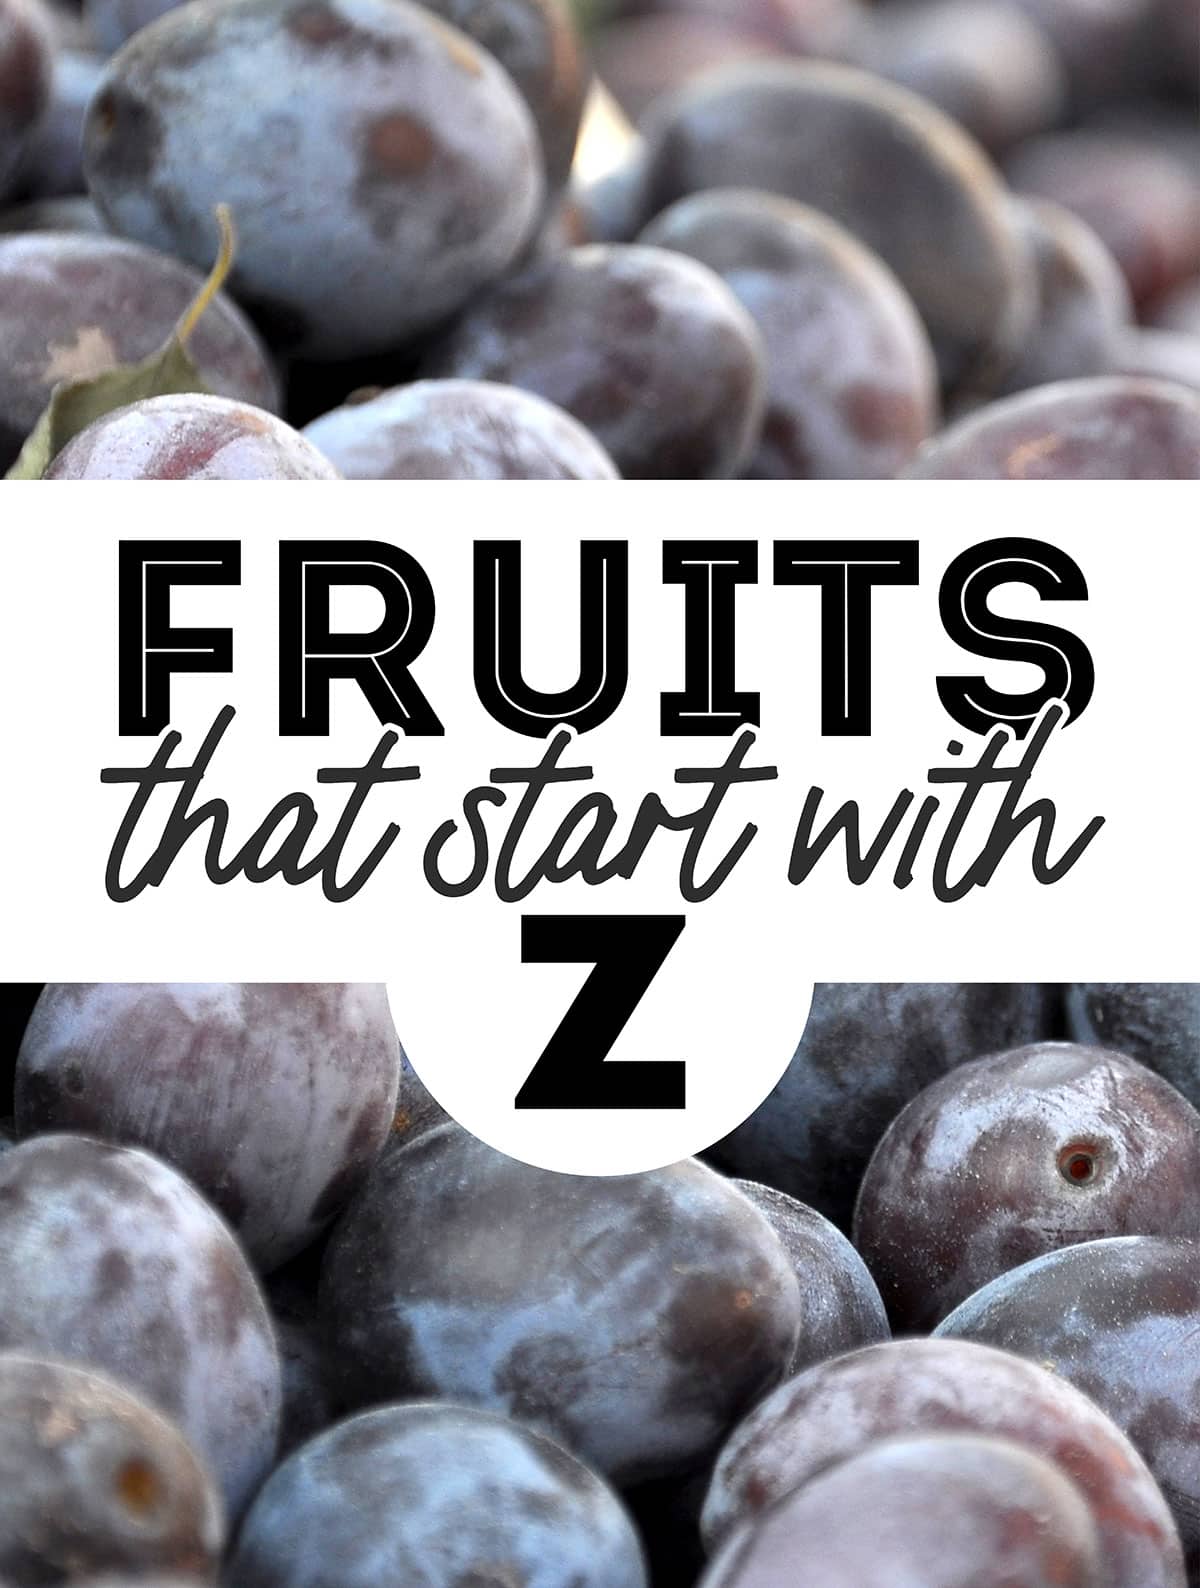 Collage that says "fruits that start with Z".